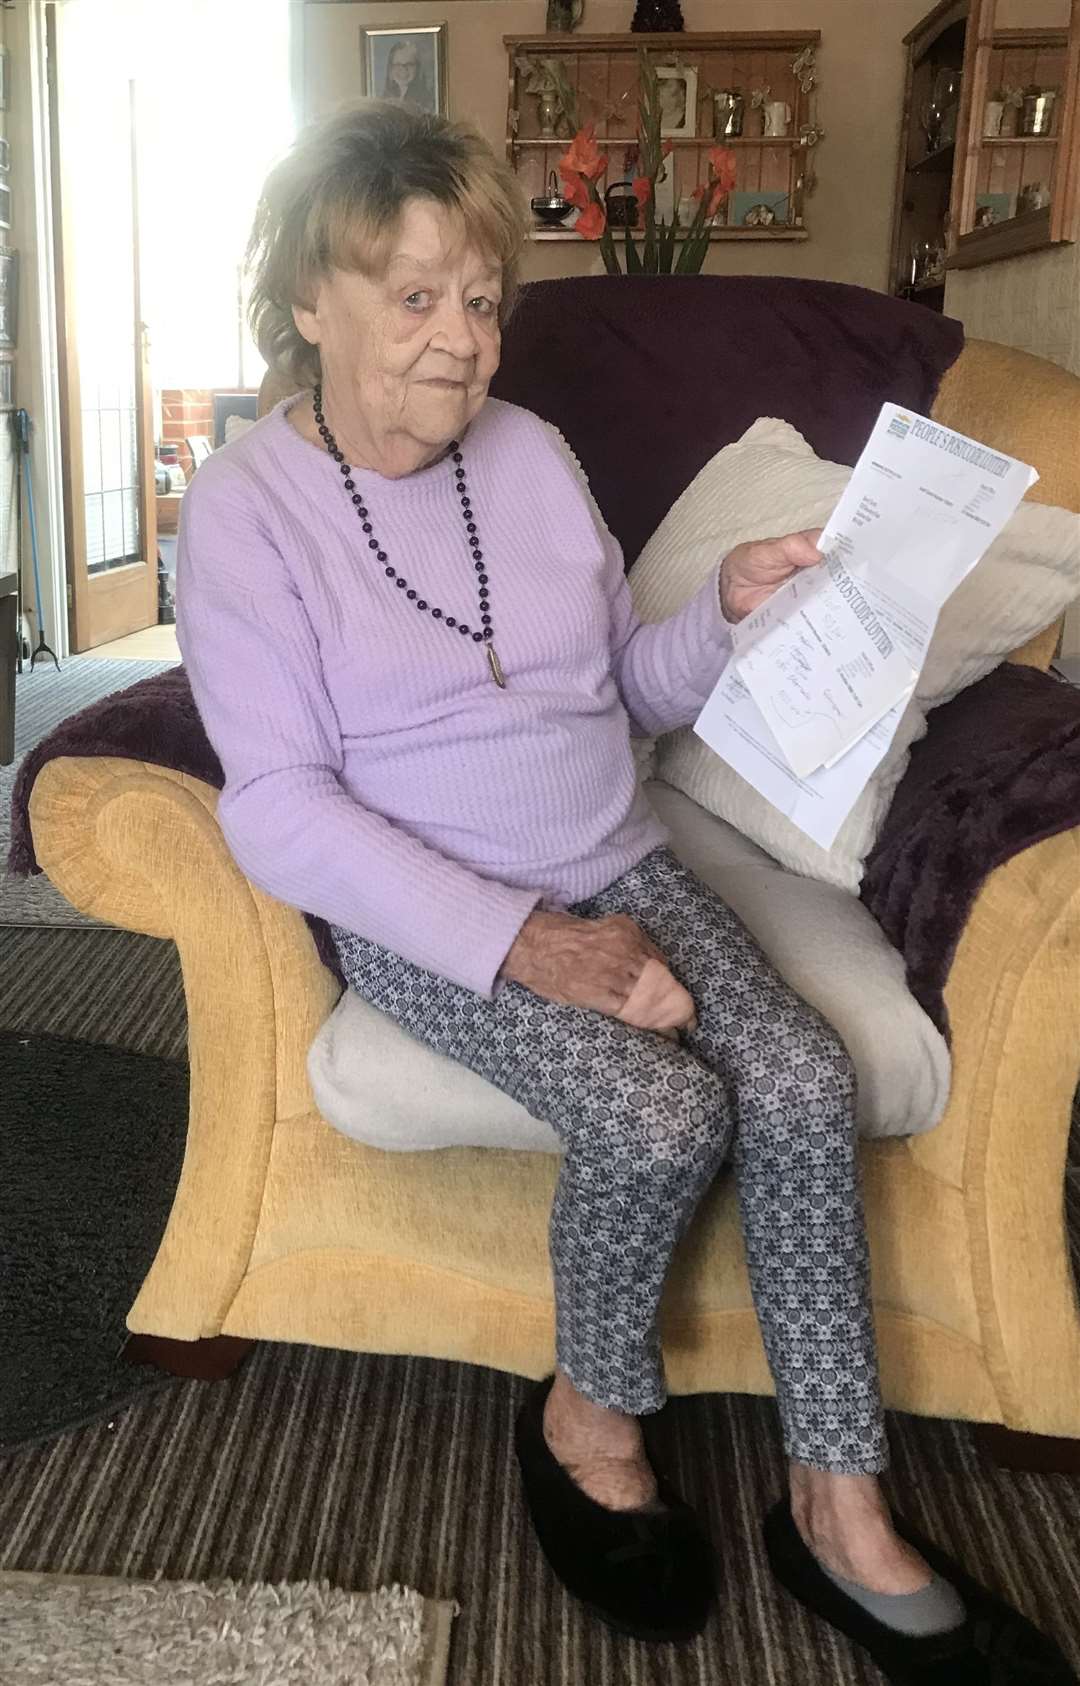 Chatham resident Beryl Smith, 79, targeted by scammers